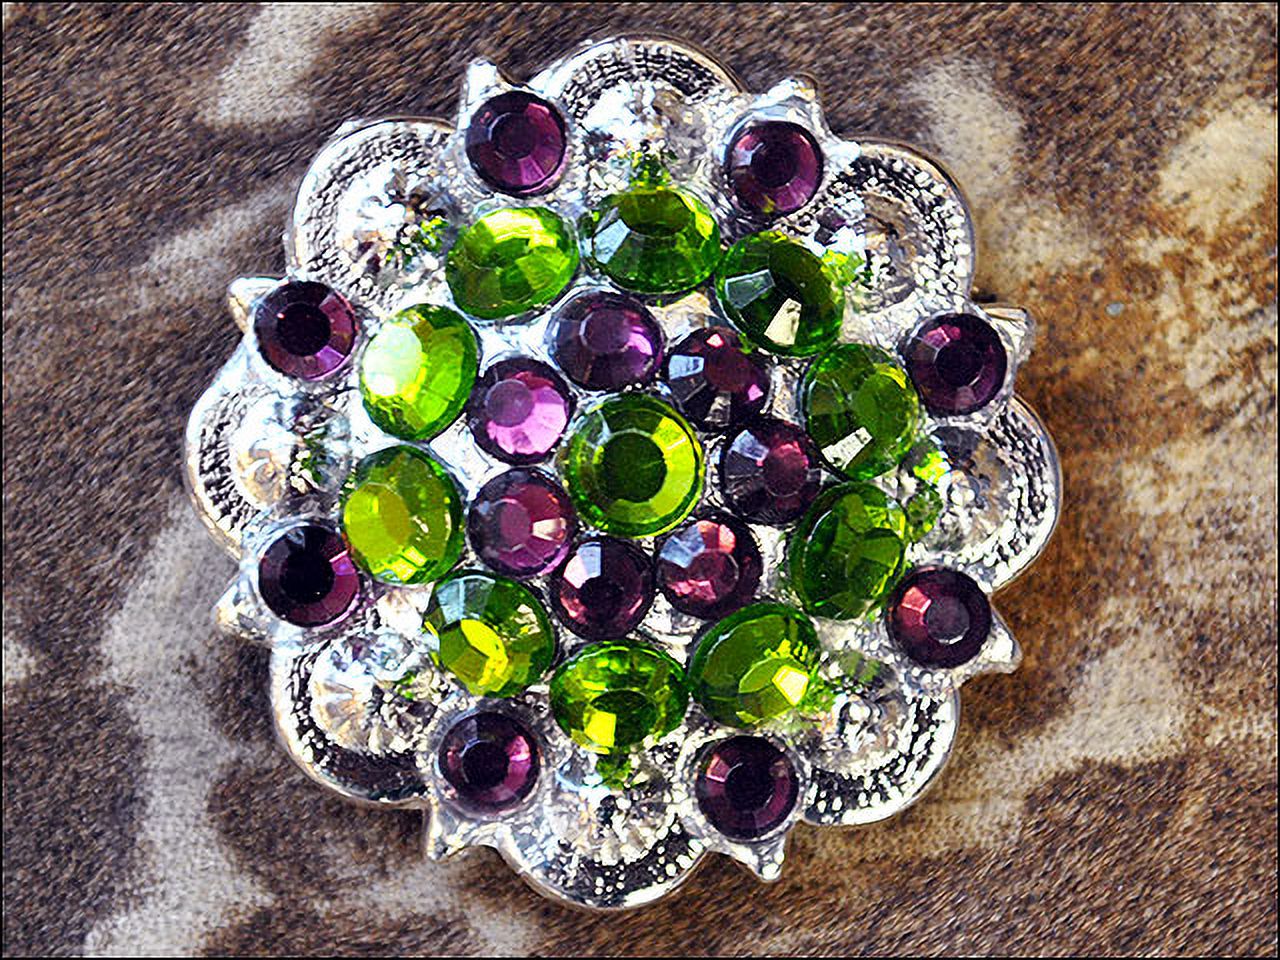 84HS Set Of 16 Screw Back Concho Peridot Amethyst Crystal 1-1/4In Saddle - image 2 of 7